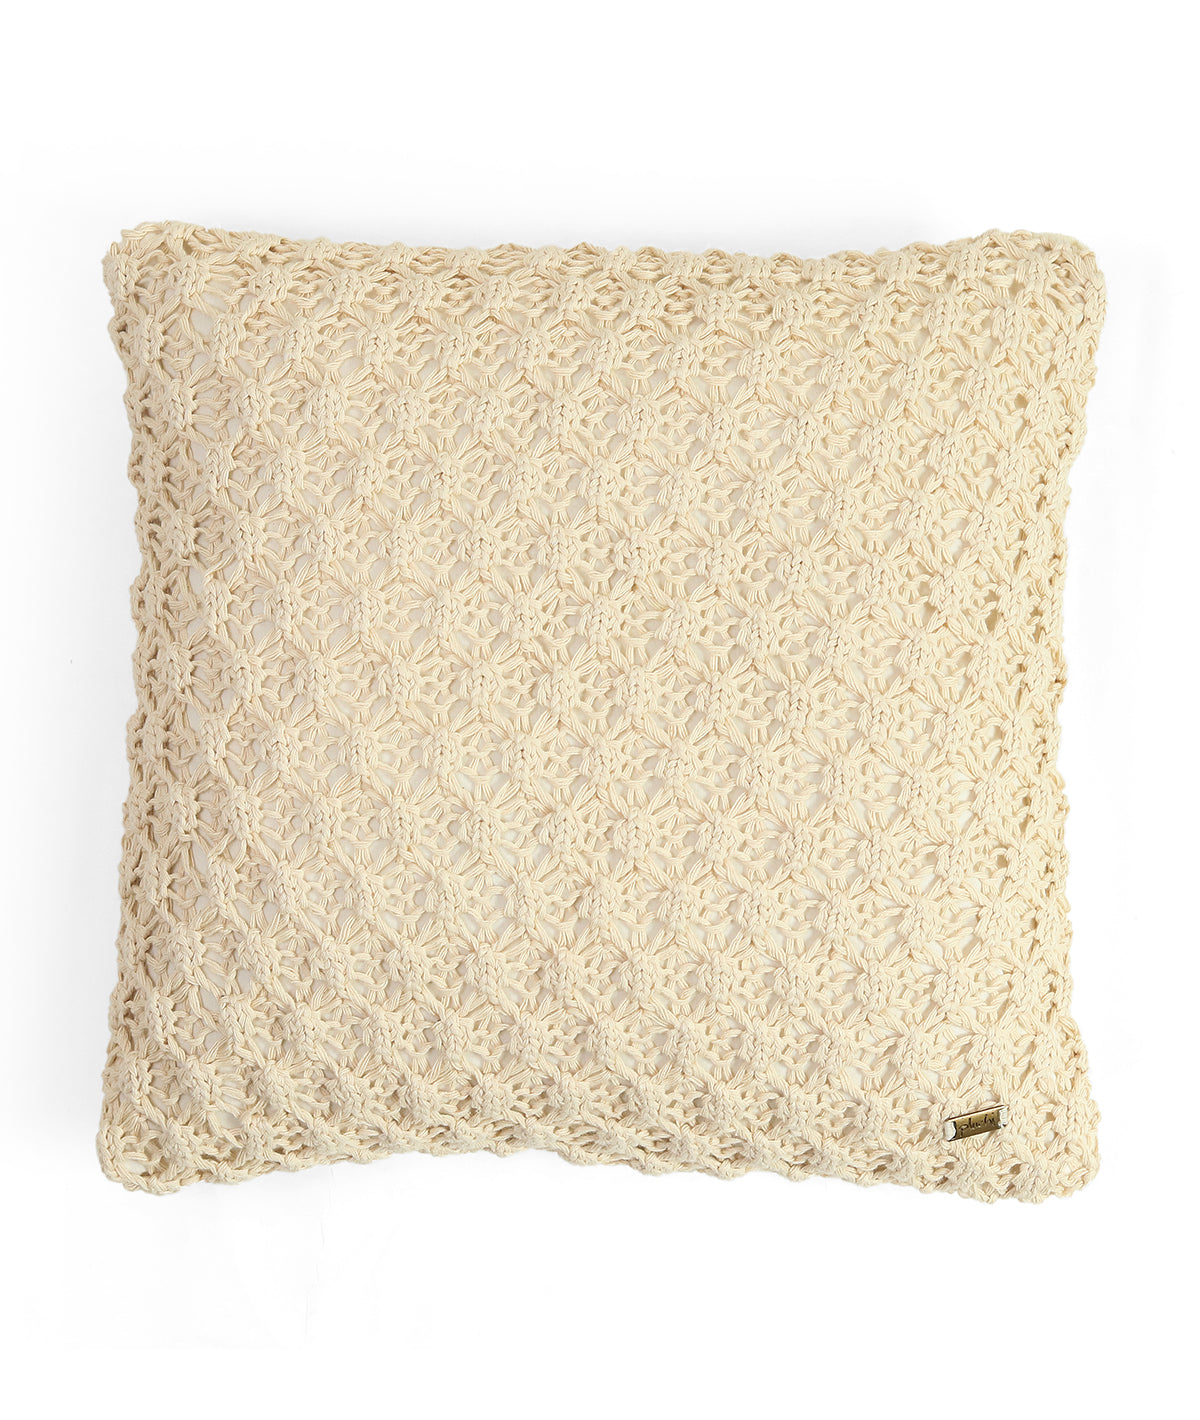 Popcorn Natural Cotton Knitted Decorative 16 X 16 Inches Cushion Cover